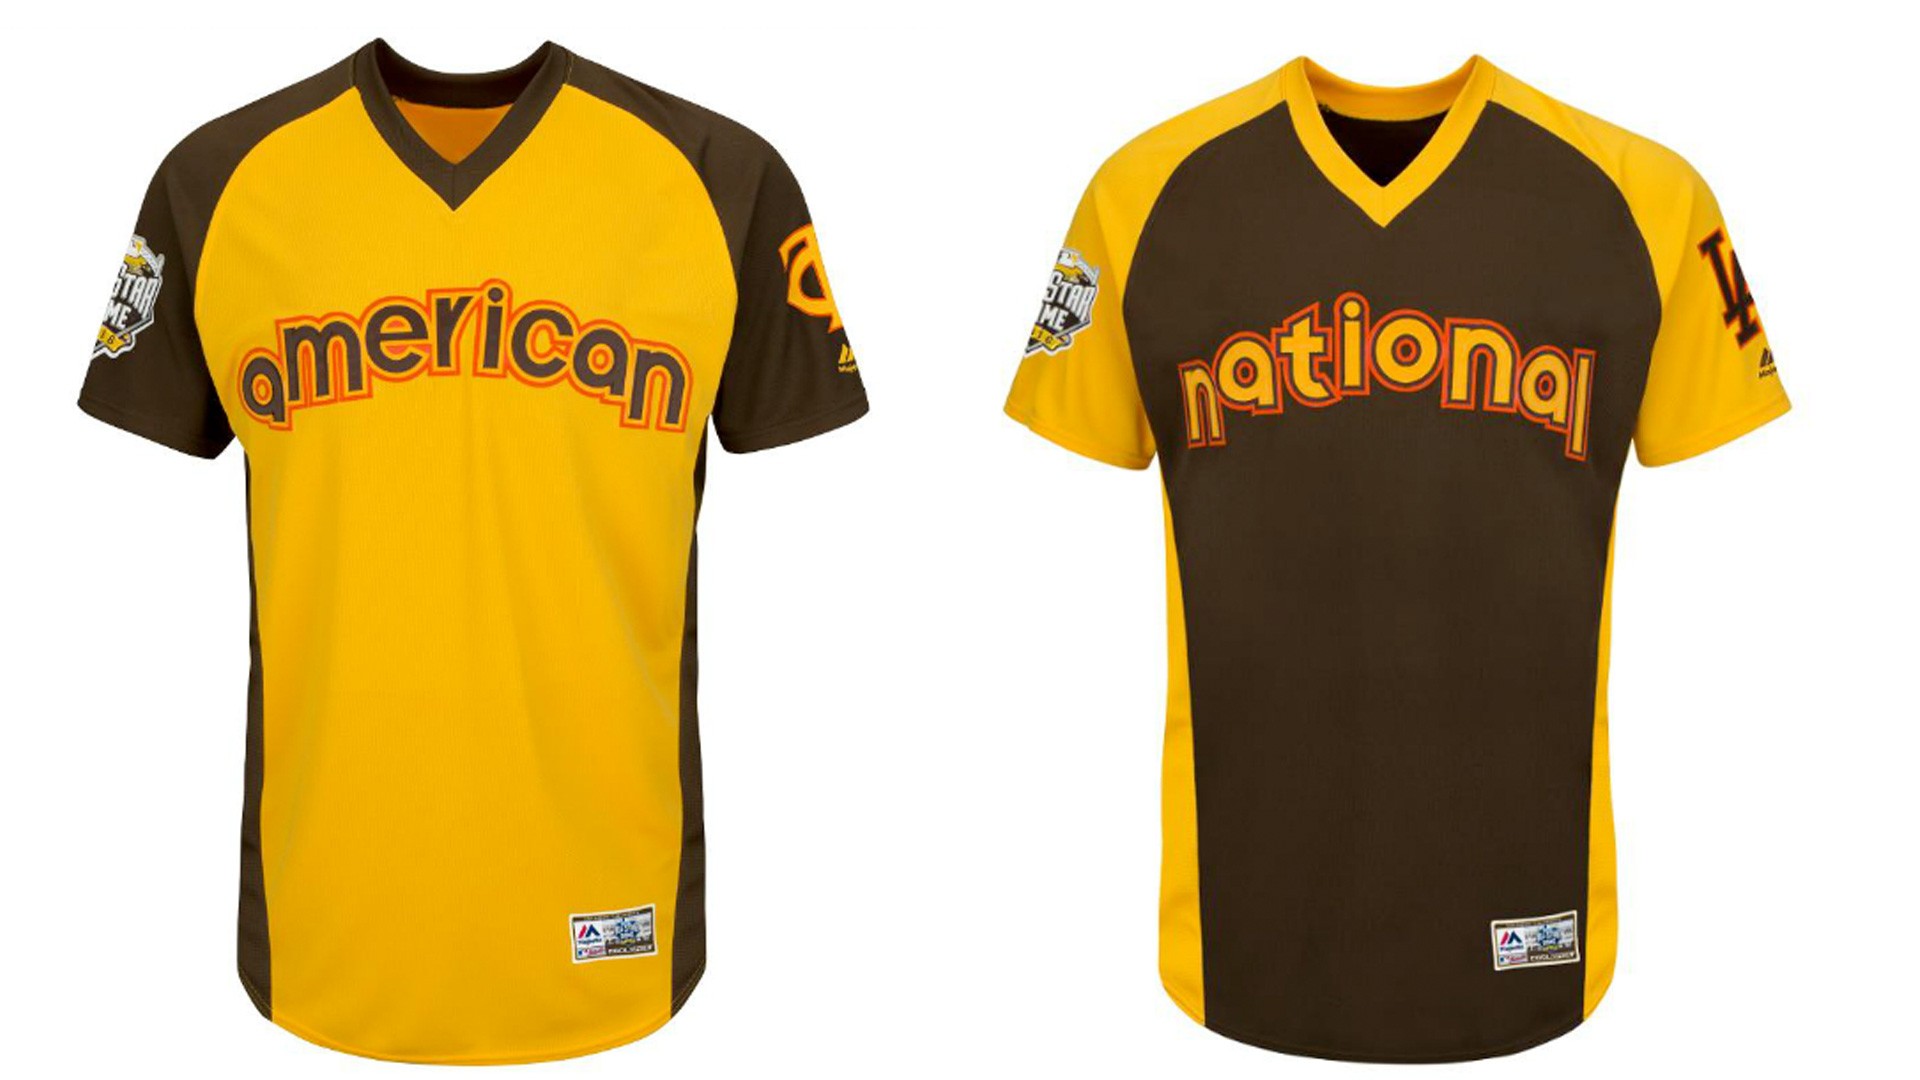 padres old school jersey